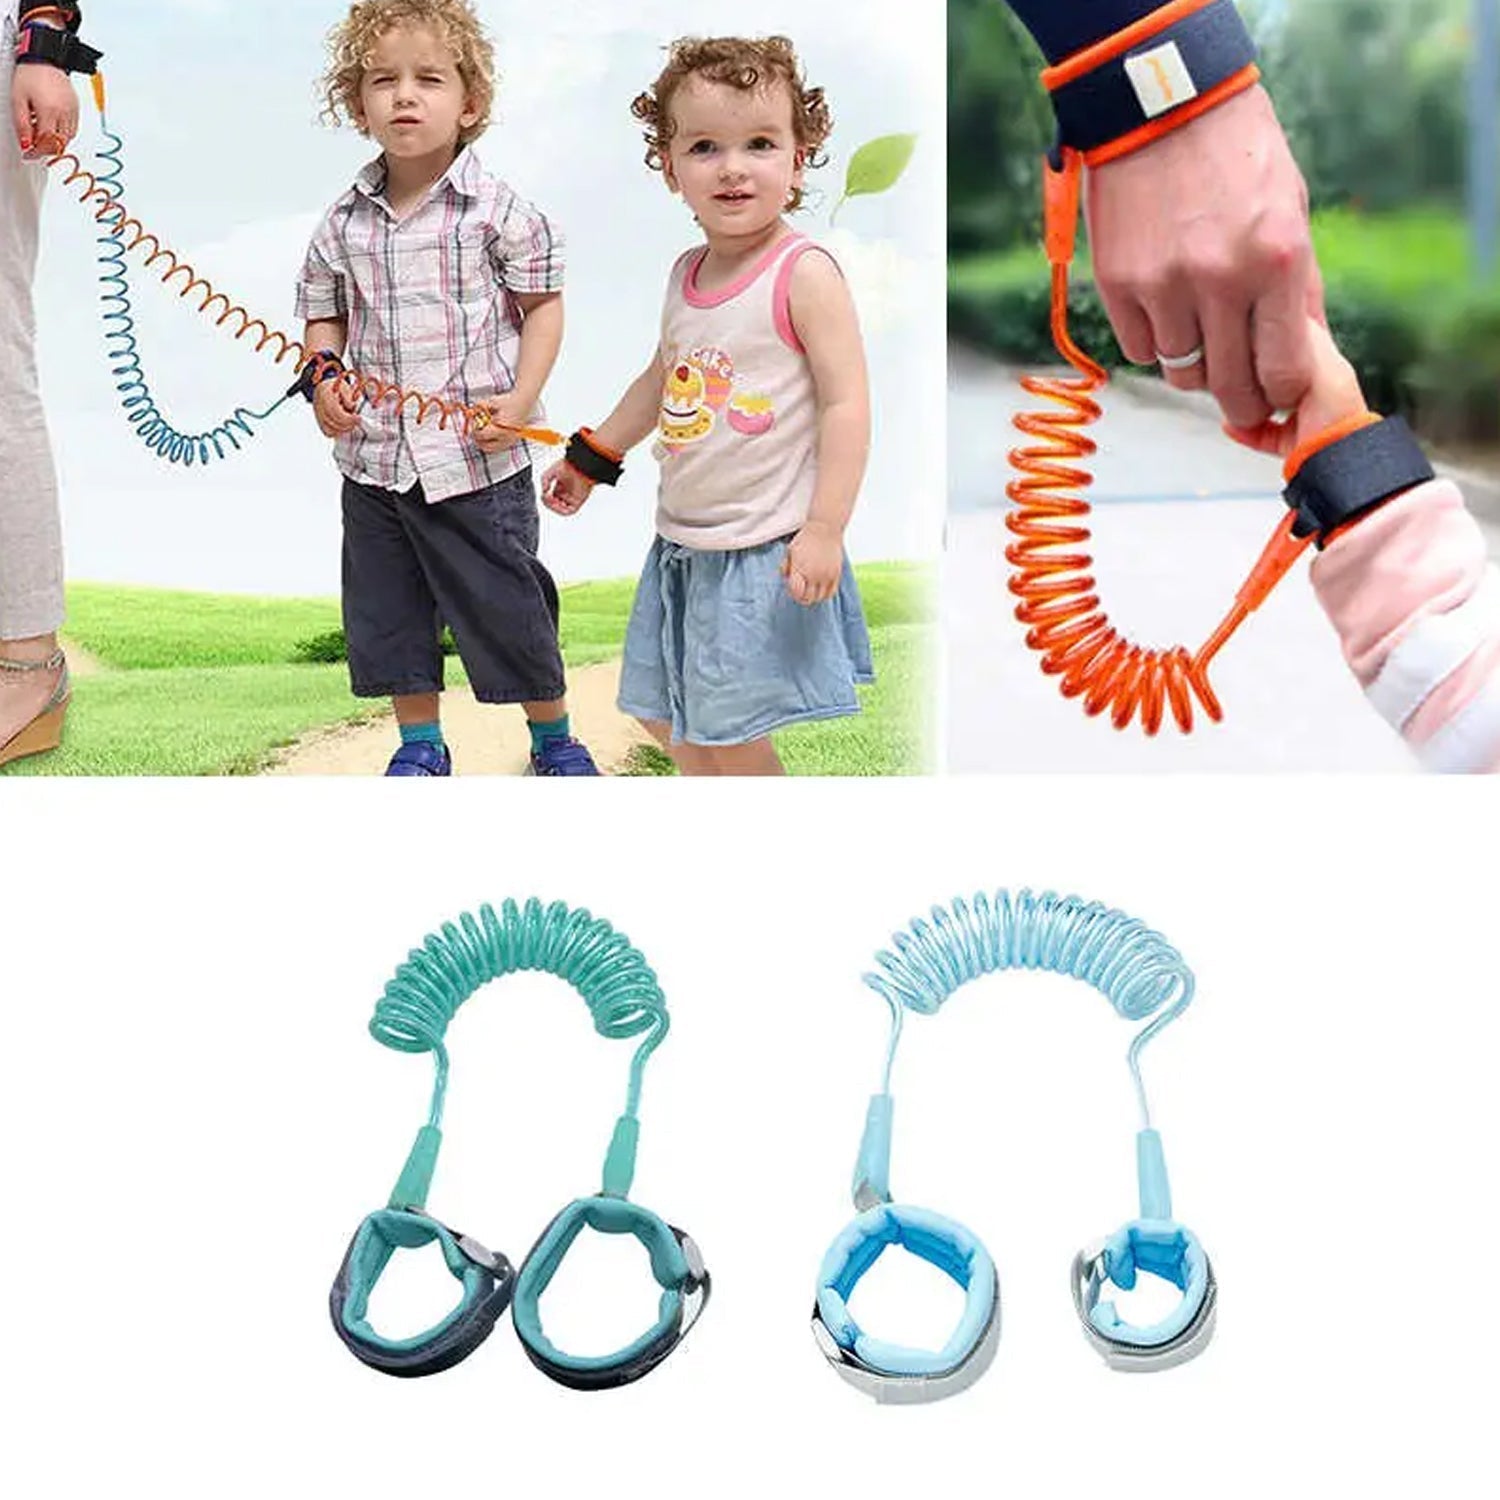 0369 Baby Child Anti Lost Safety Wrist Link Harness Strap Rope Leash Walking Hand Belt for Toddlers Kids DeoDap